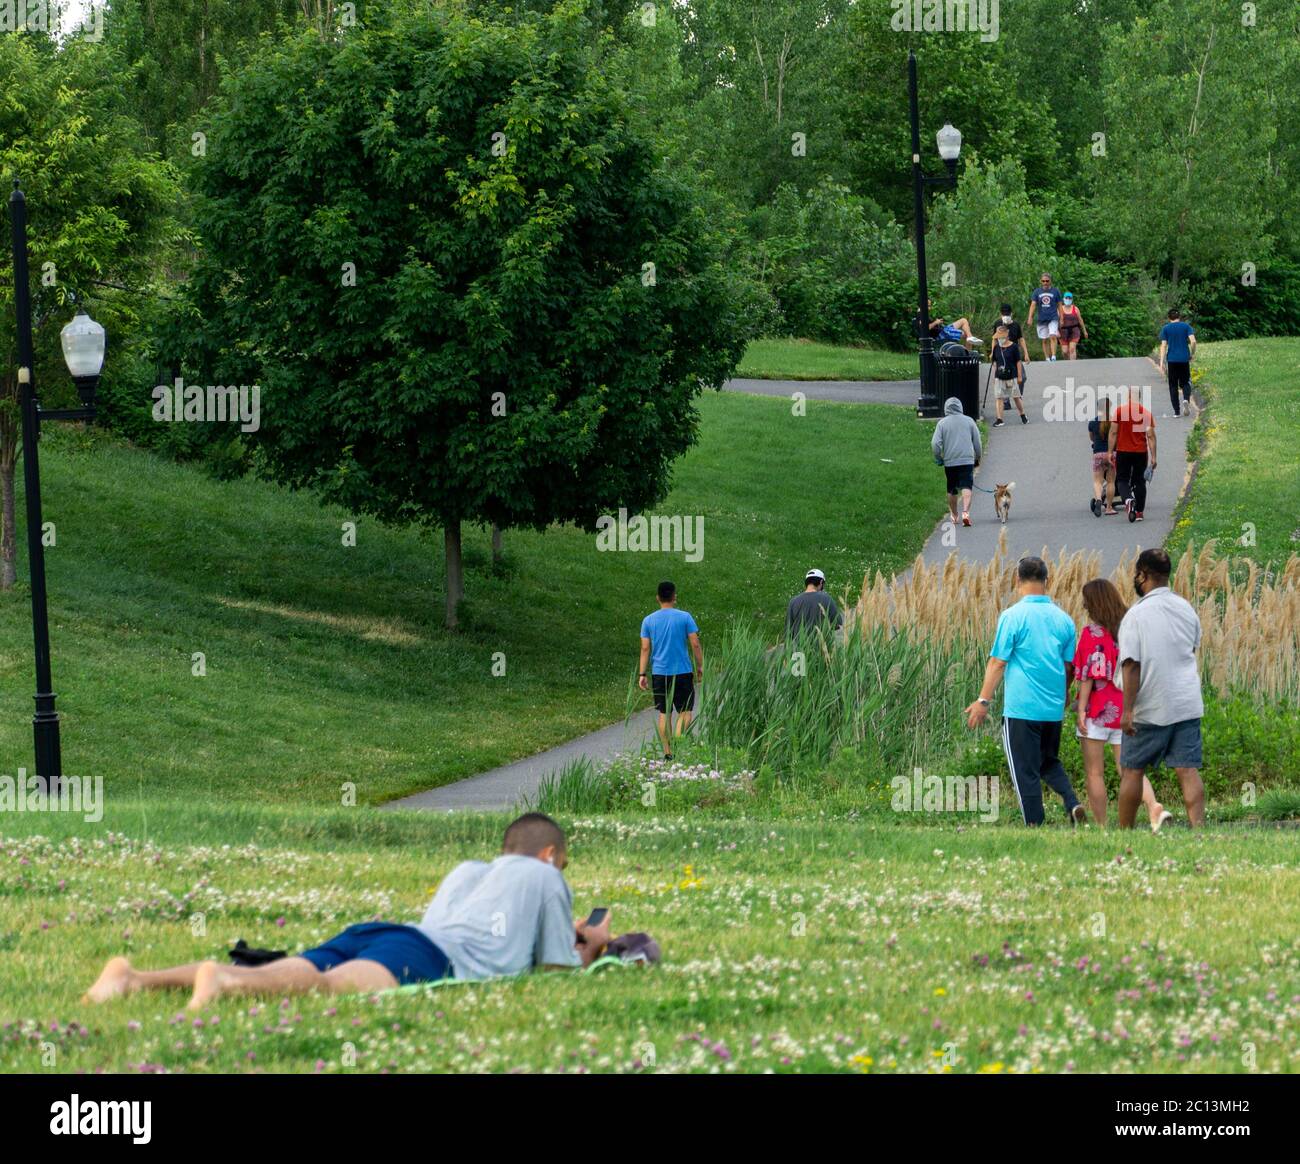 Man relaxing on green grass in public park keeping safe distance as parks open up in New Jersey. Overpeck Park. Stock Photo